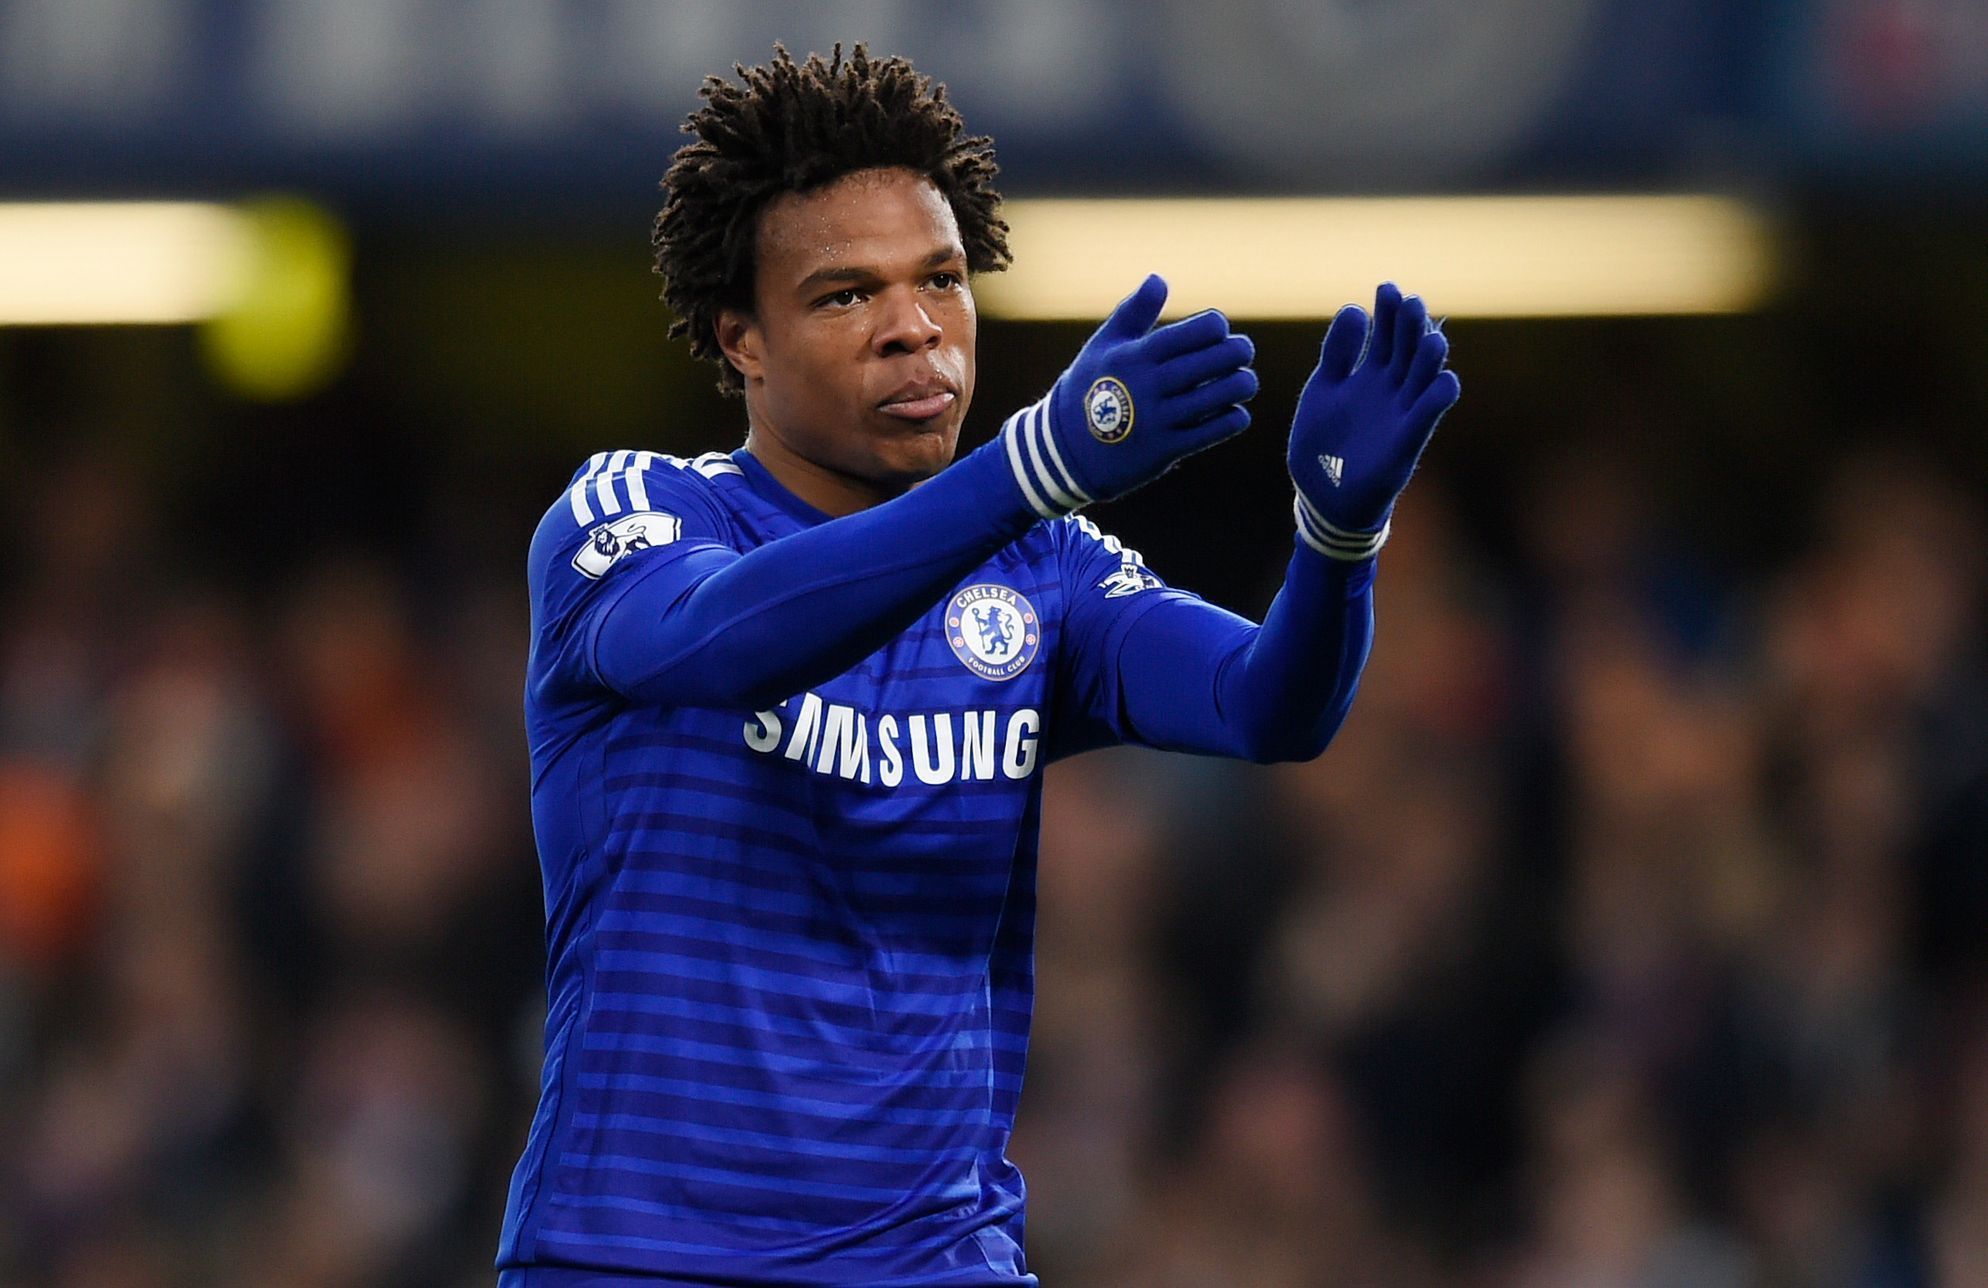 Football: Loic Remy celebrates after scoring the second goal for Chelsea